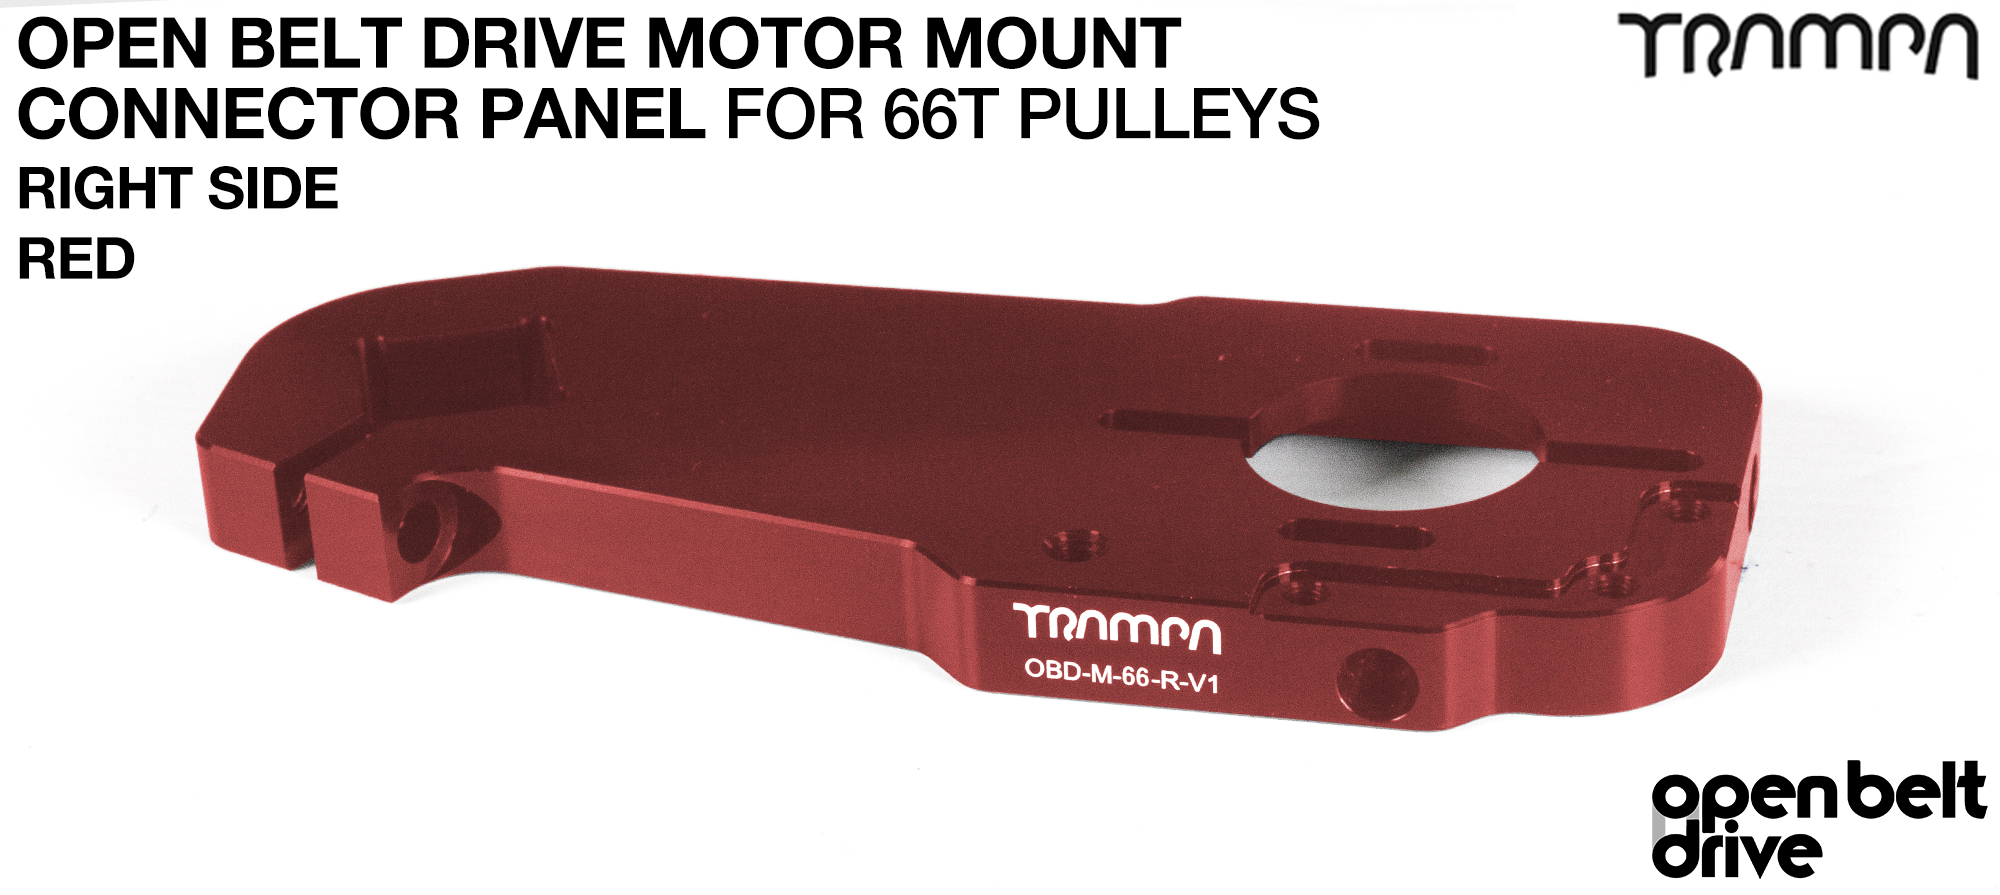 OBD Open Belt Drive Motor Mount Connector Panel for 66 tooth Pulleys - GOOFY - RED